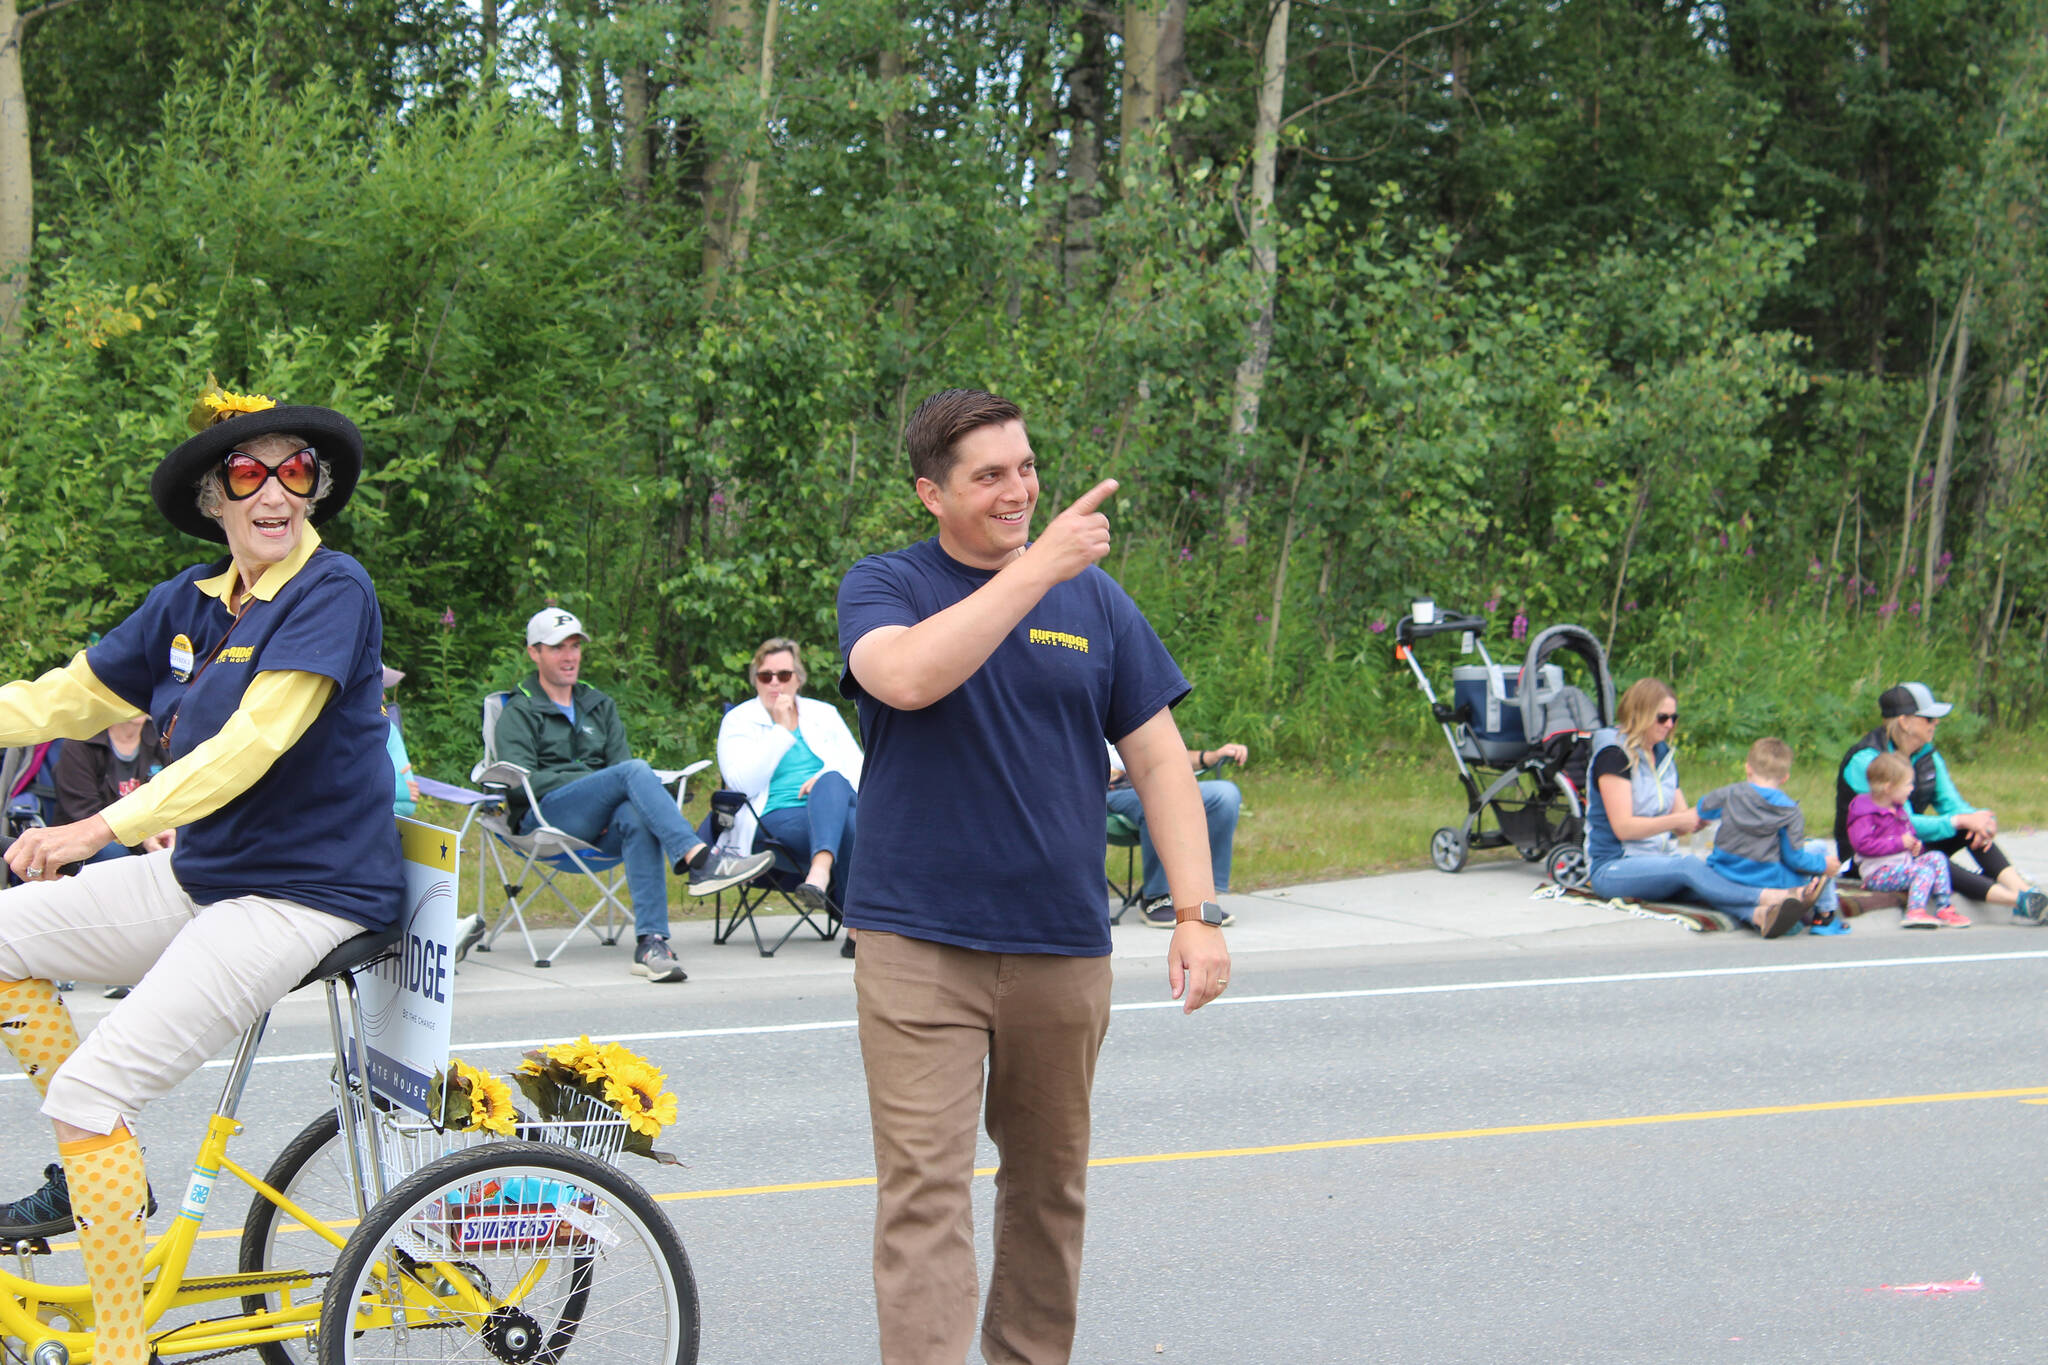 2022 Alaska State House candidate Justin Ruffridge hands out candy during the 65th annual Soldotna Progress Days Parade on Saturday, July 23, 2022, in Soldotna, Alaska. (Ashlyn O’Hara/Peninsula Clarion)